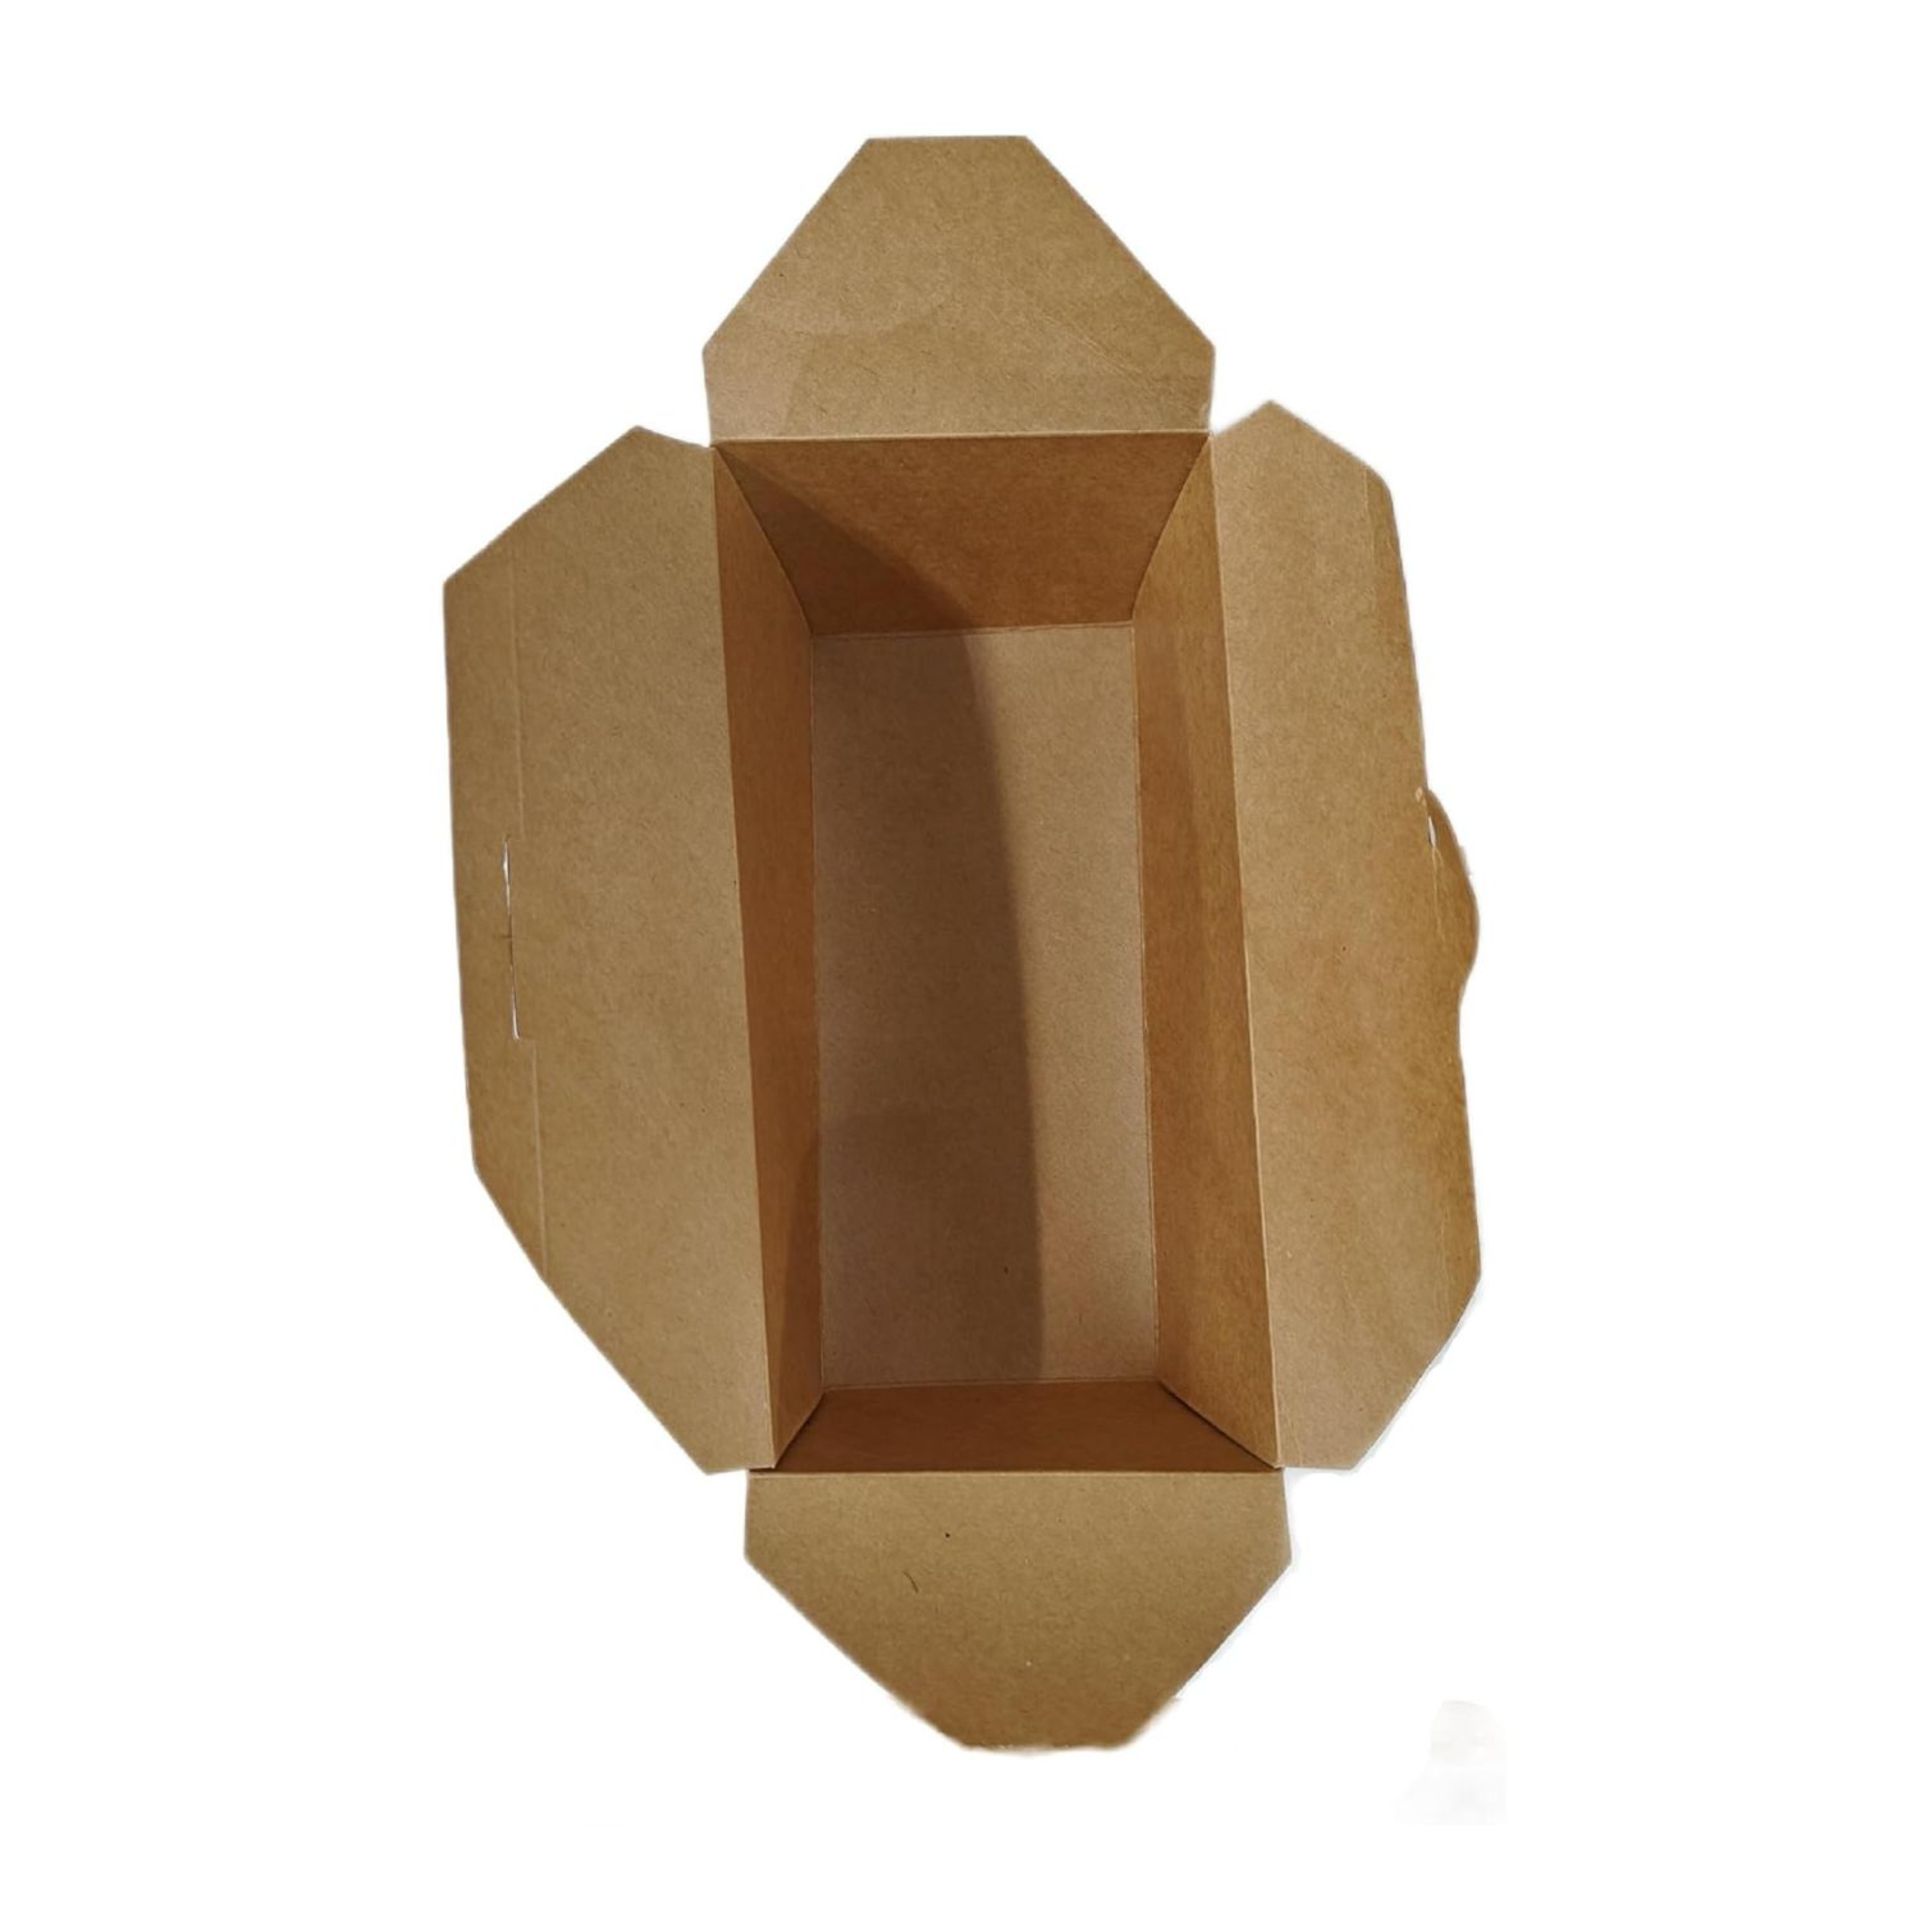 FOOD TAKEAWAY BOXES, DISPOSABLE KRAFT BOXES, PACK OF 40 - Image 3 of 4